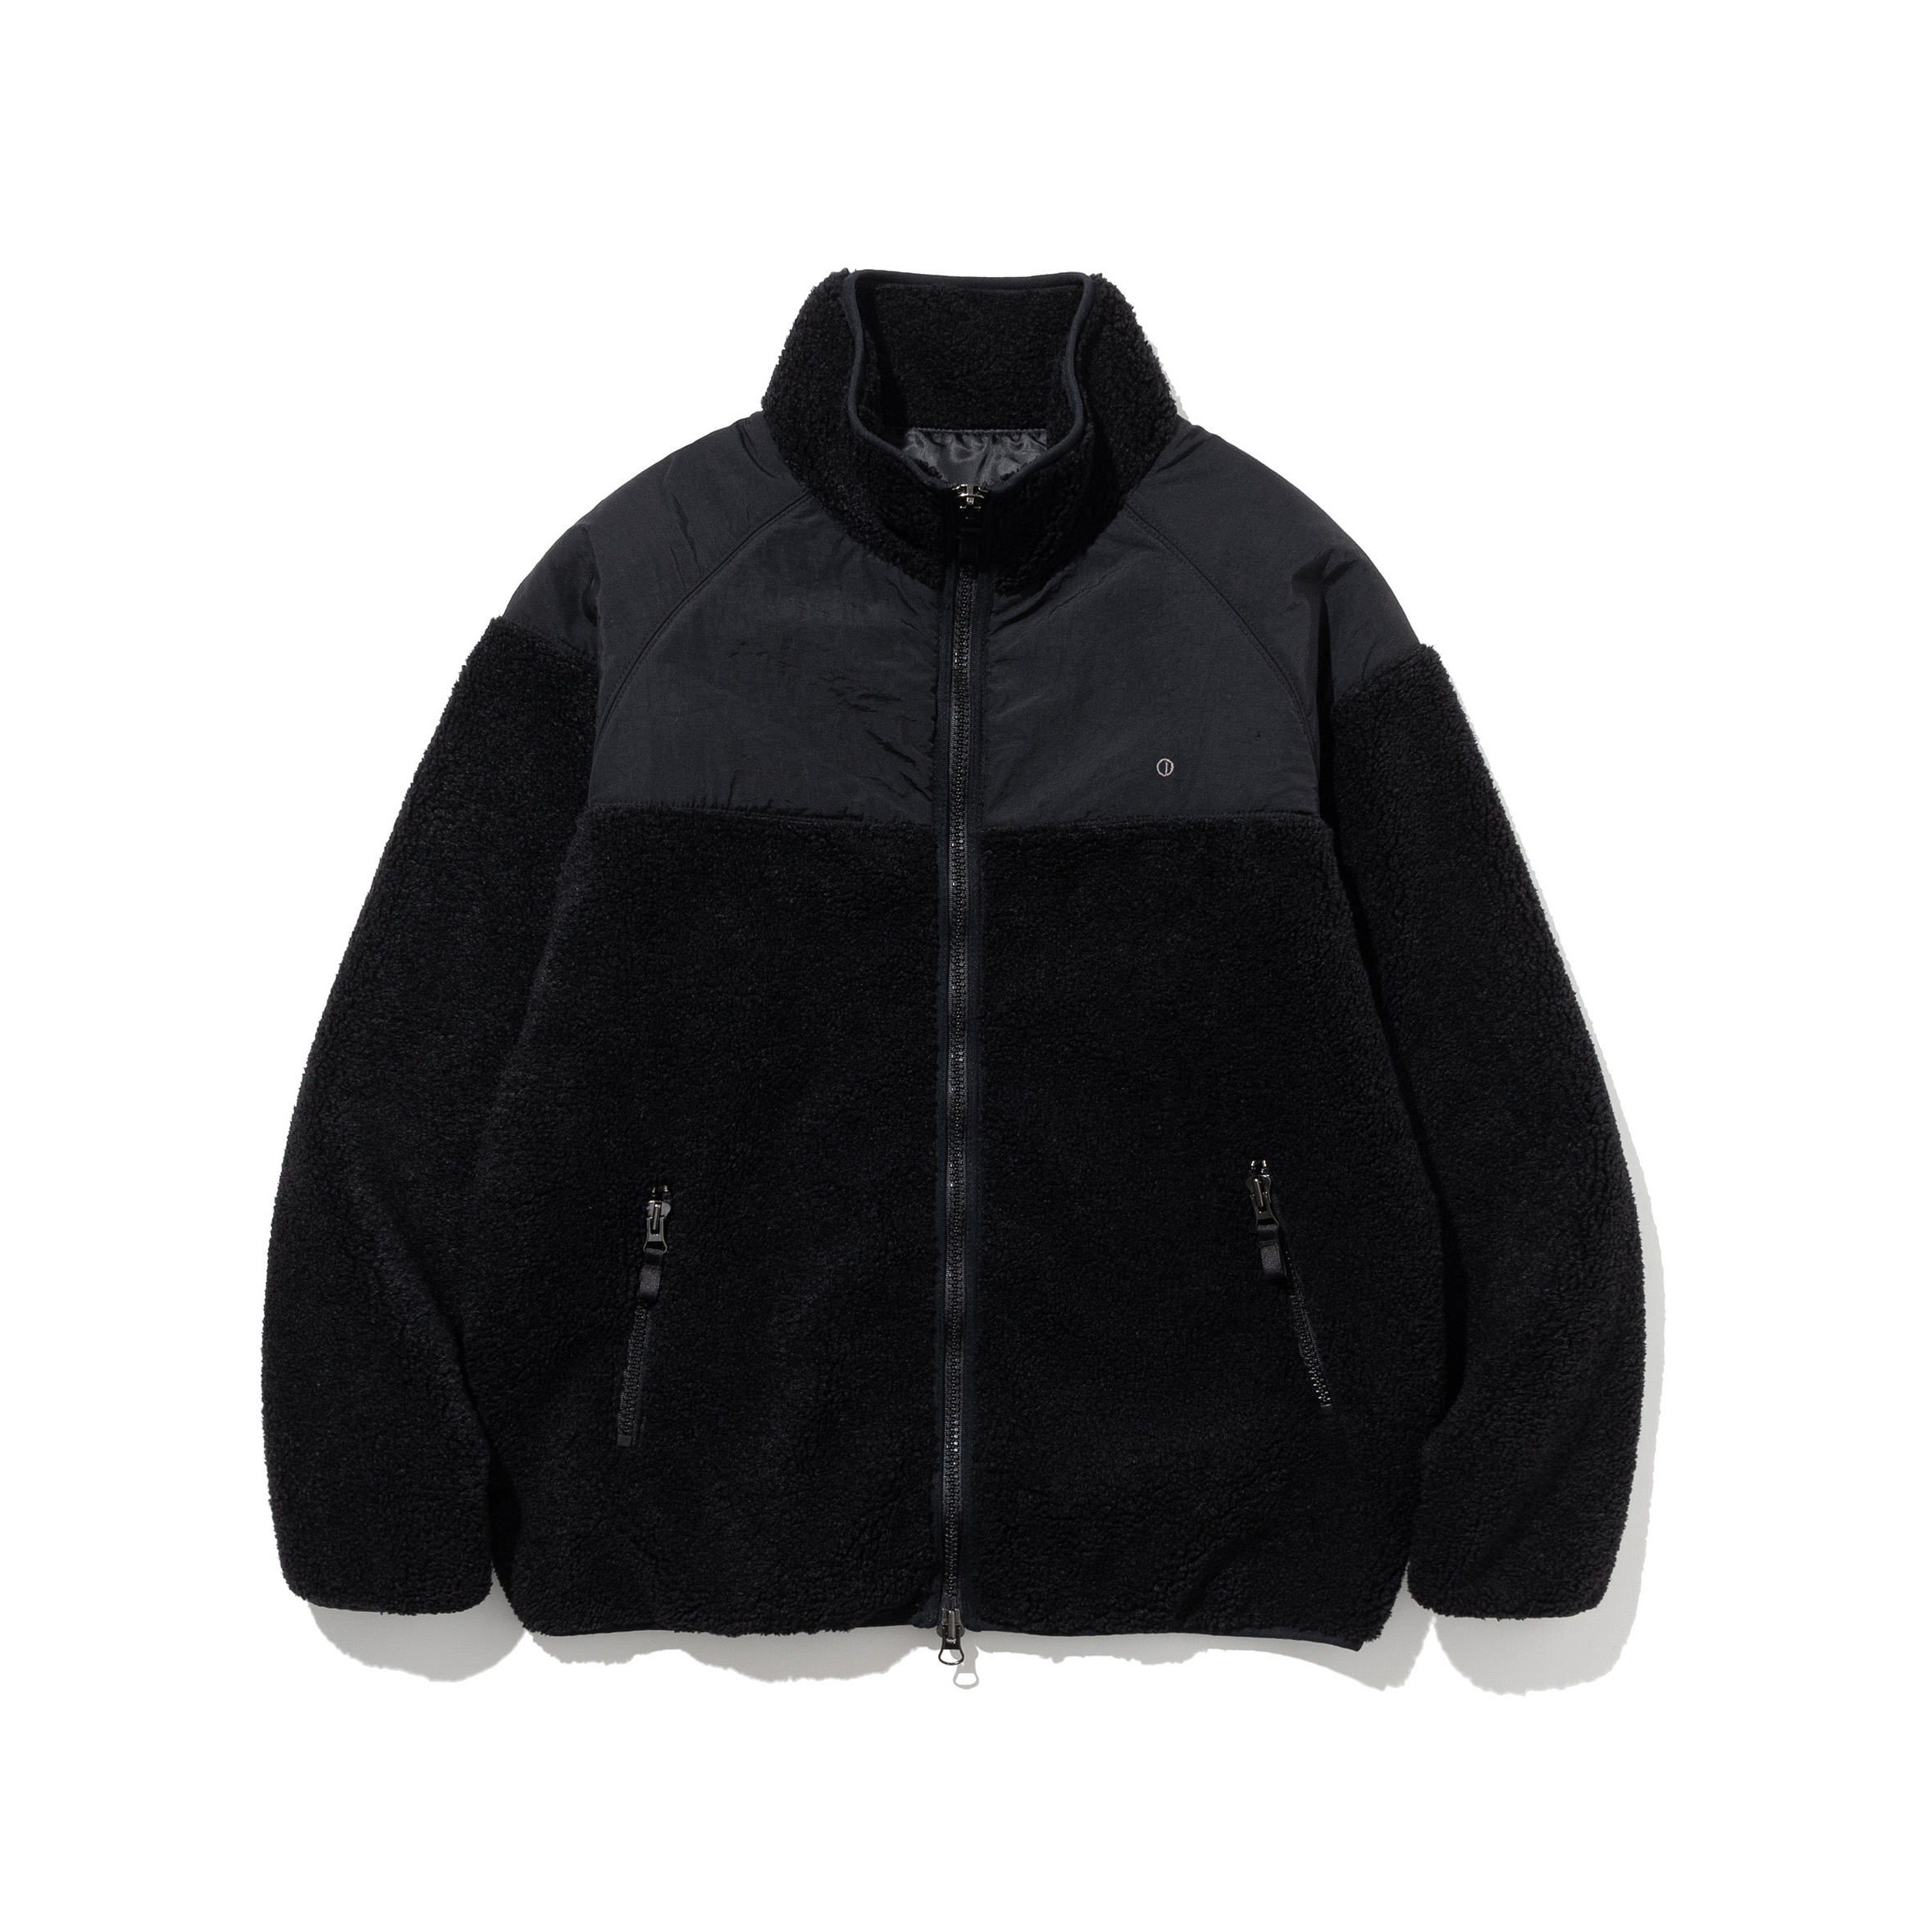 NOT FOR DAILY FLEECE MASCULINE JACKET #1